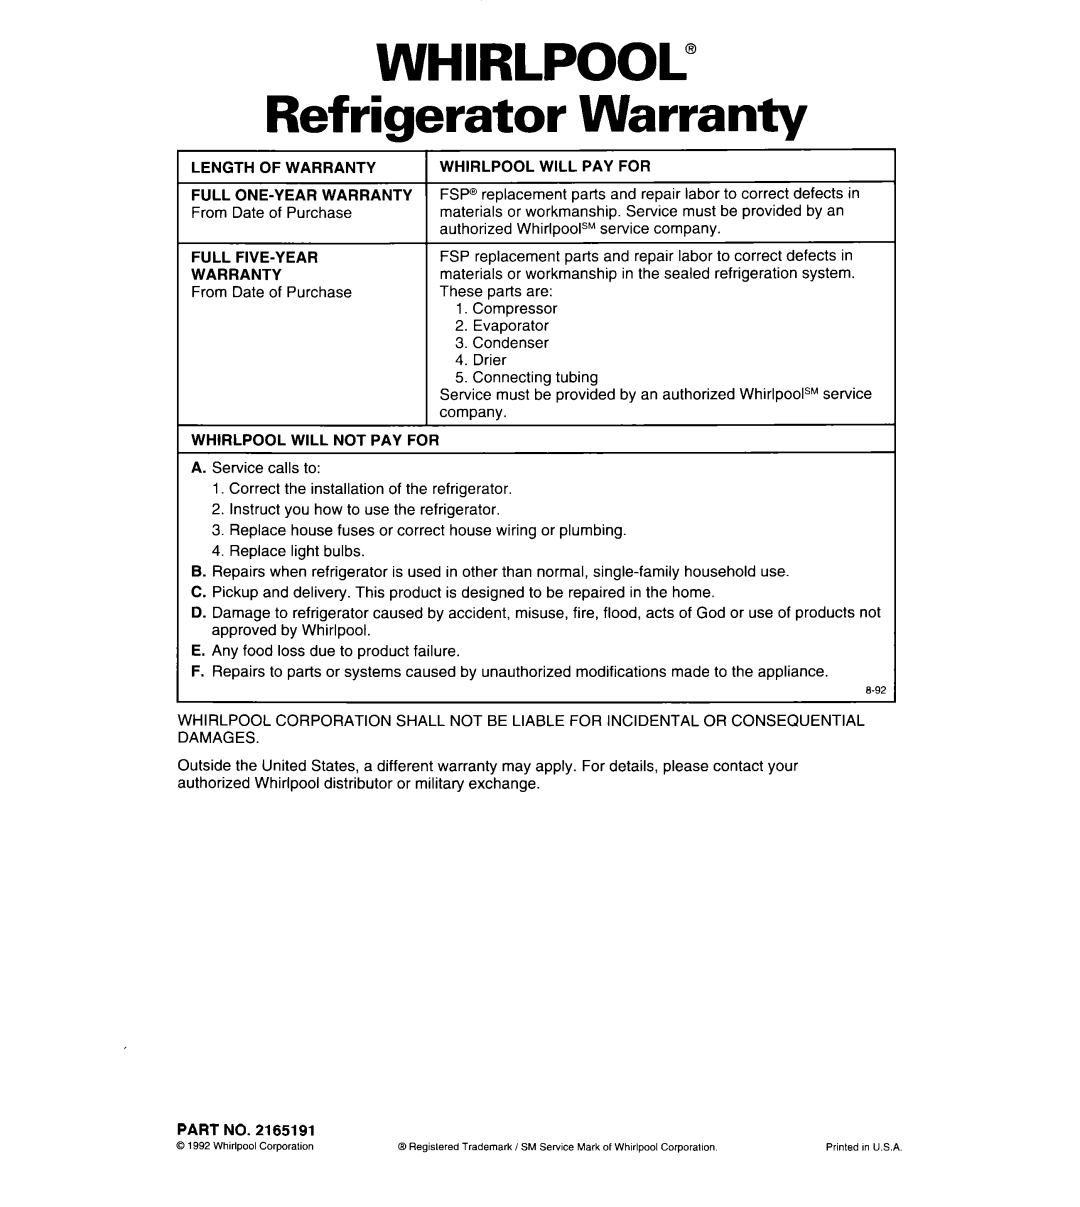 Whirlpool 6ET18ZK important safety instructions Warranty, Whirlpool@, Refrigerator 